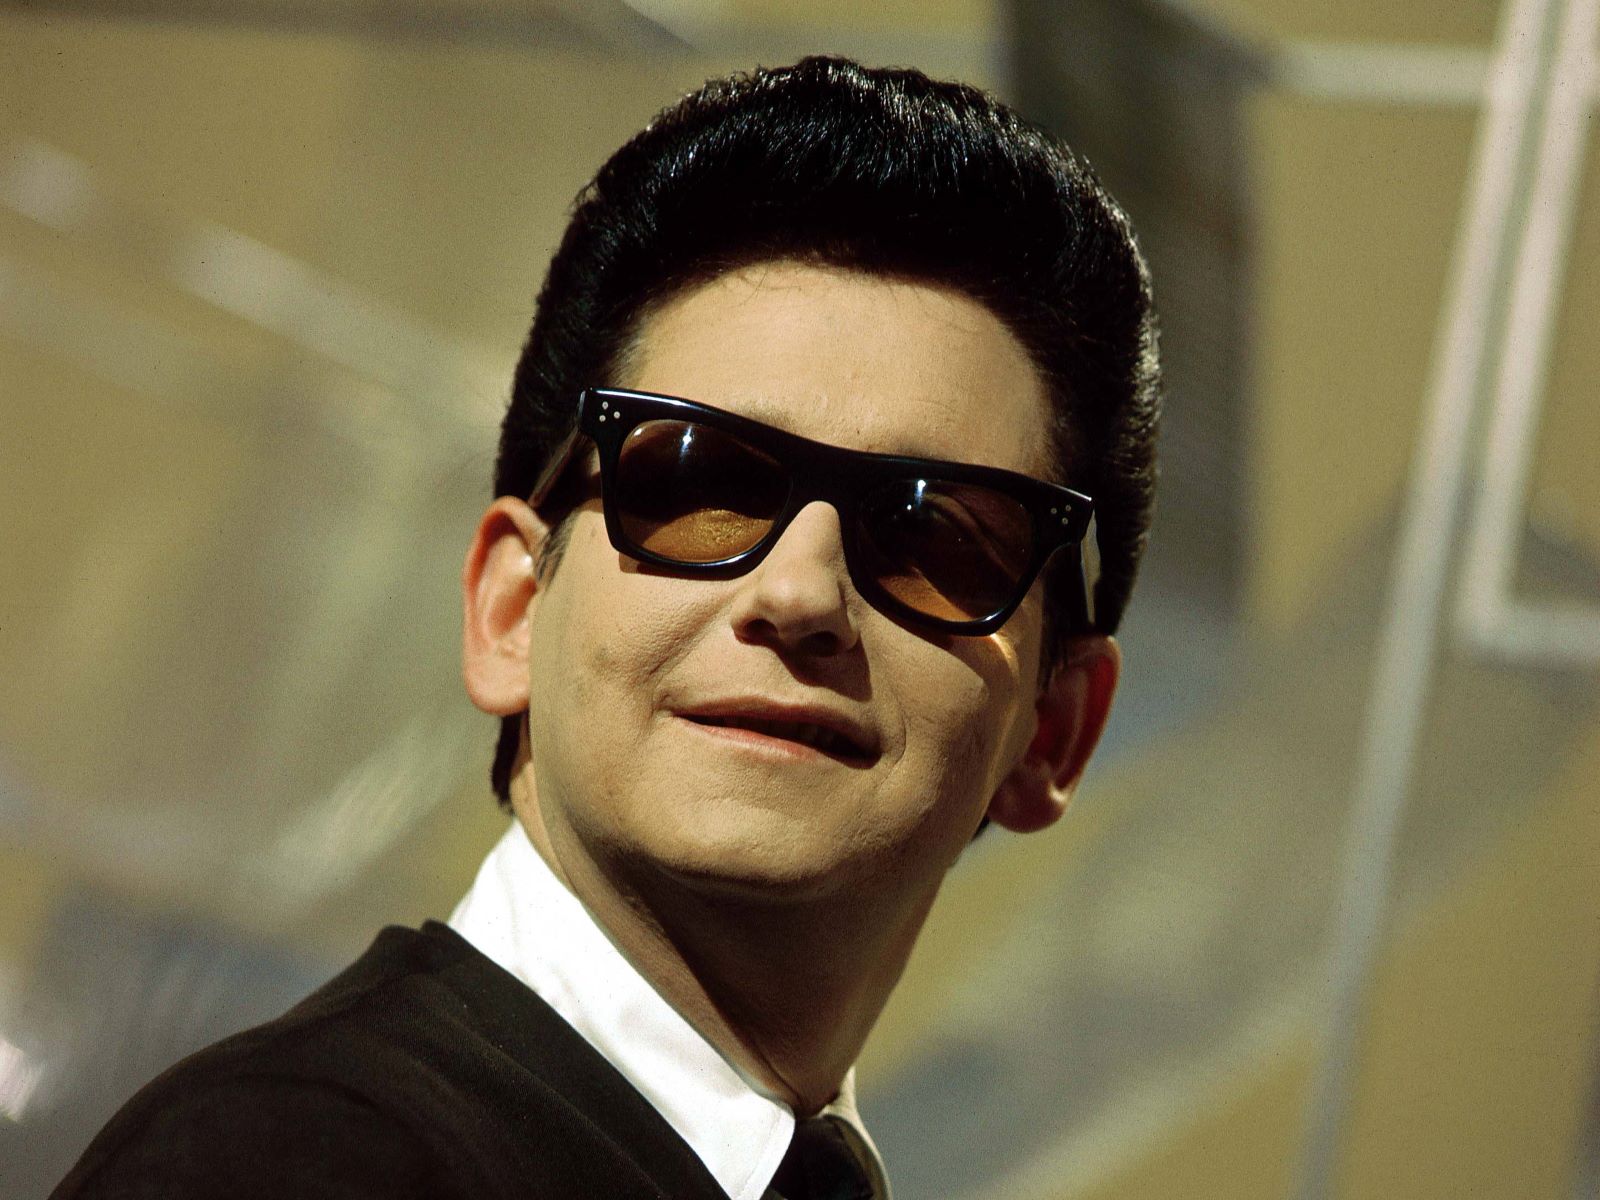 The Surprising Reason Behind Roy Orbison's Iconic Sunglasses